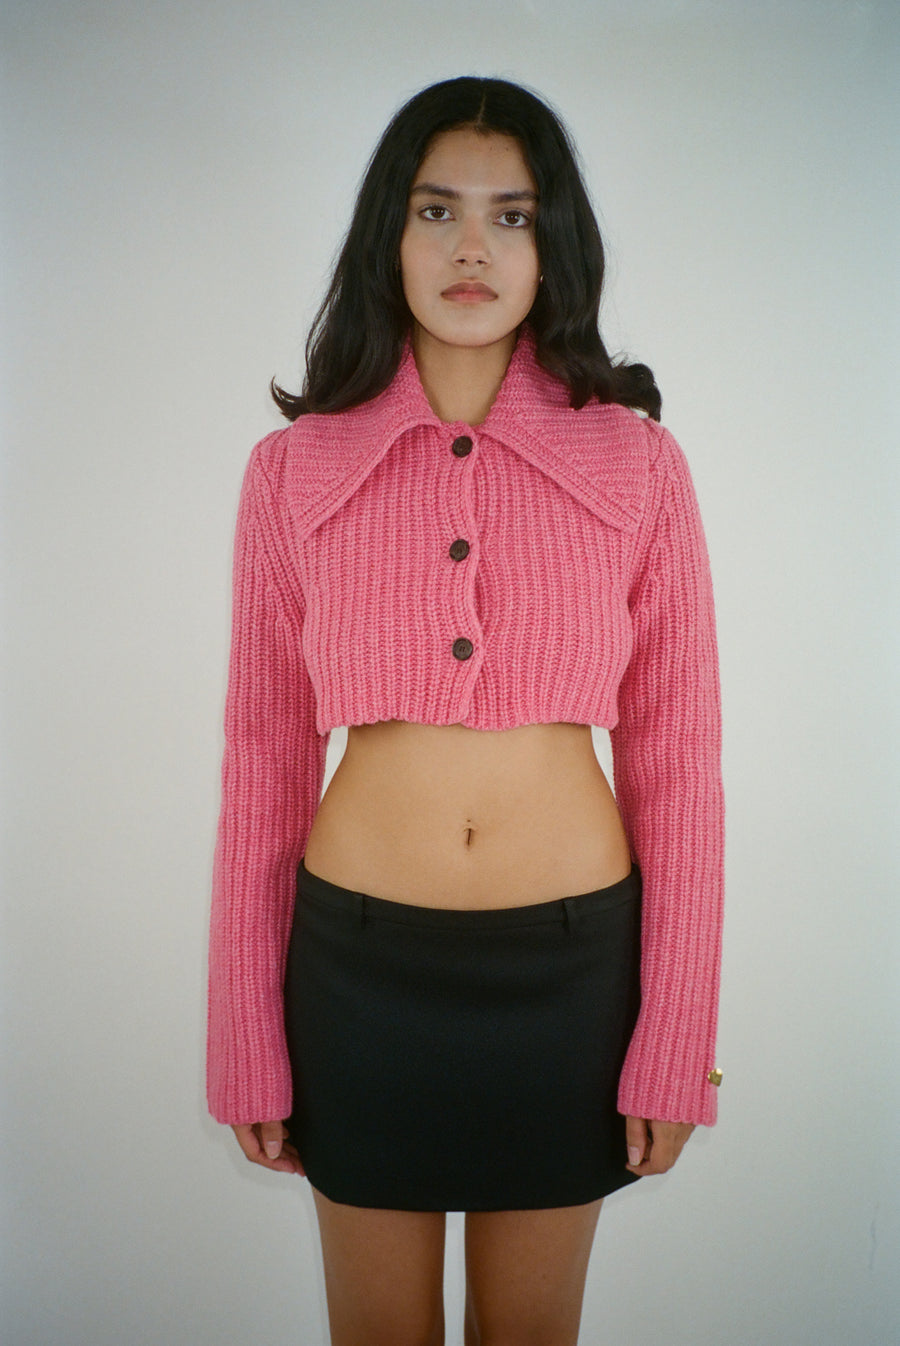 Cropped cardigan sweater in carnation pink with button closure on model